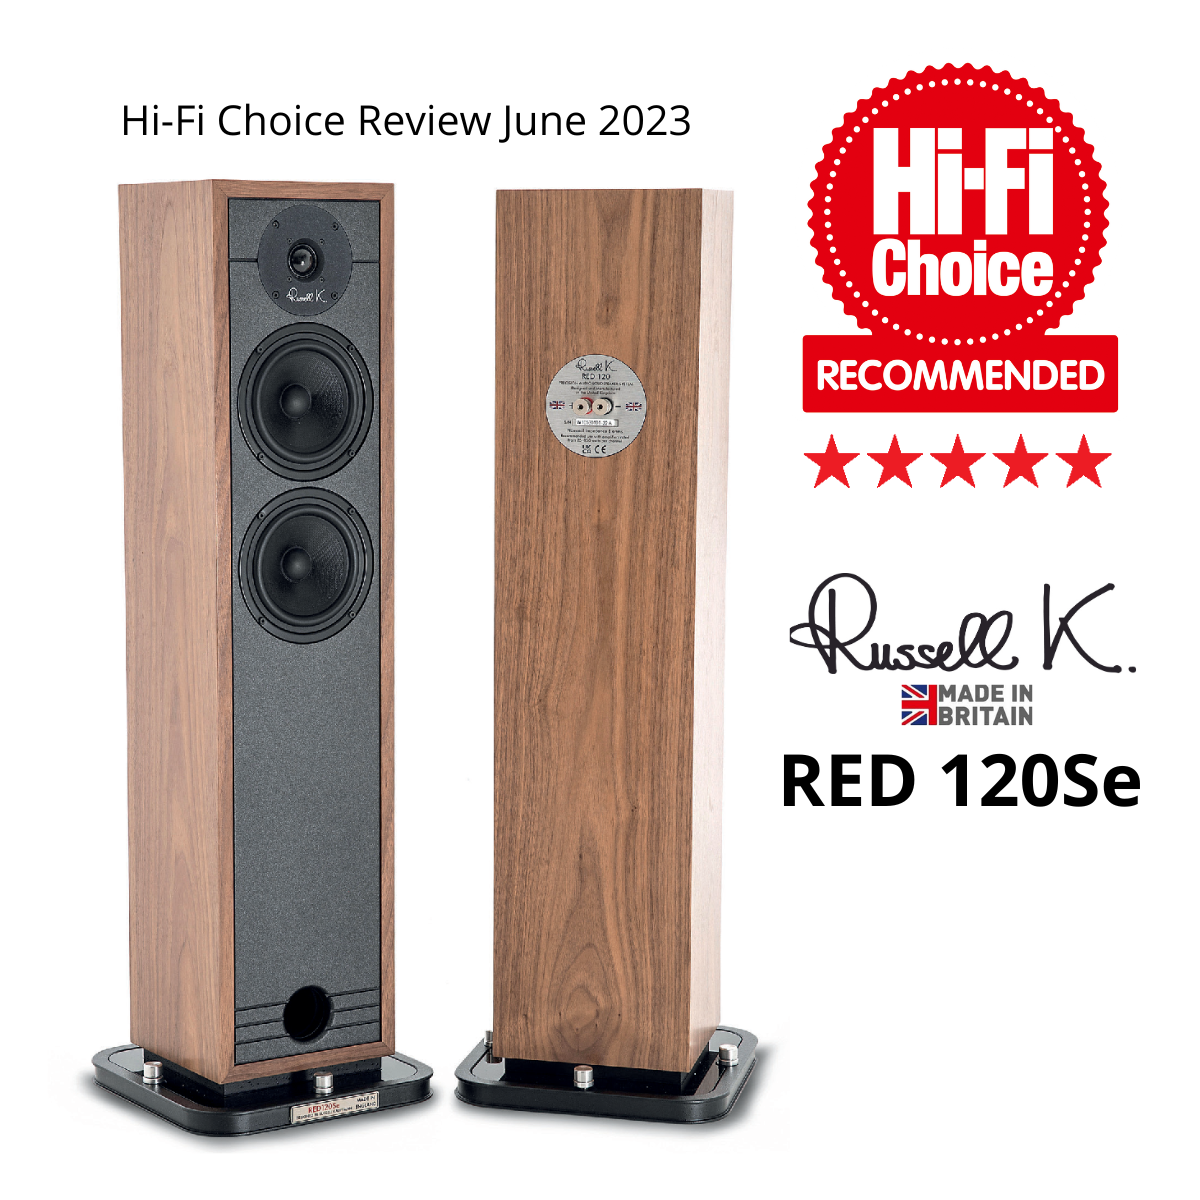 Review Hi-Fi Choice issued june 2023 - all stars recommened - Russell K Red 120Se